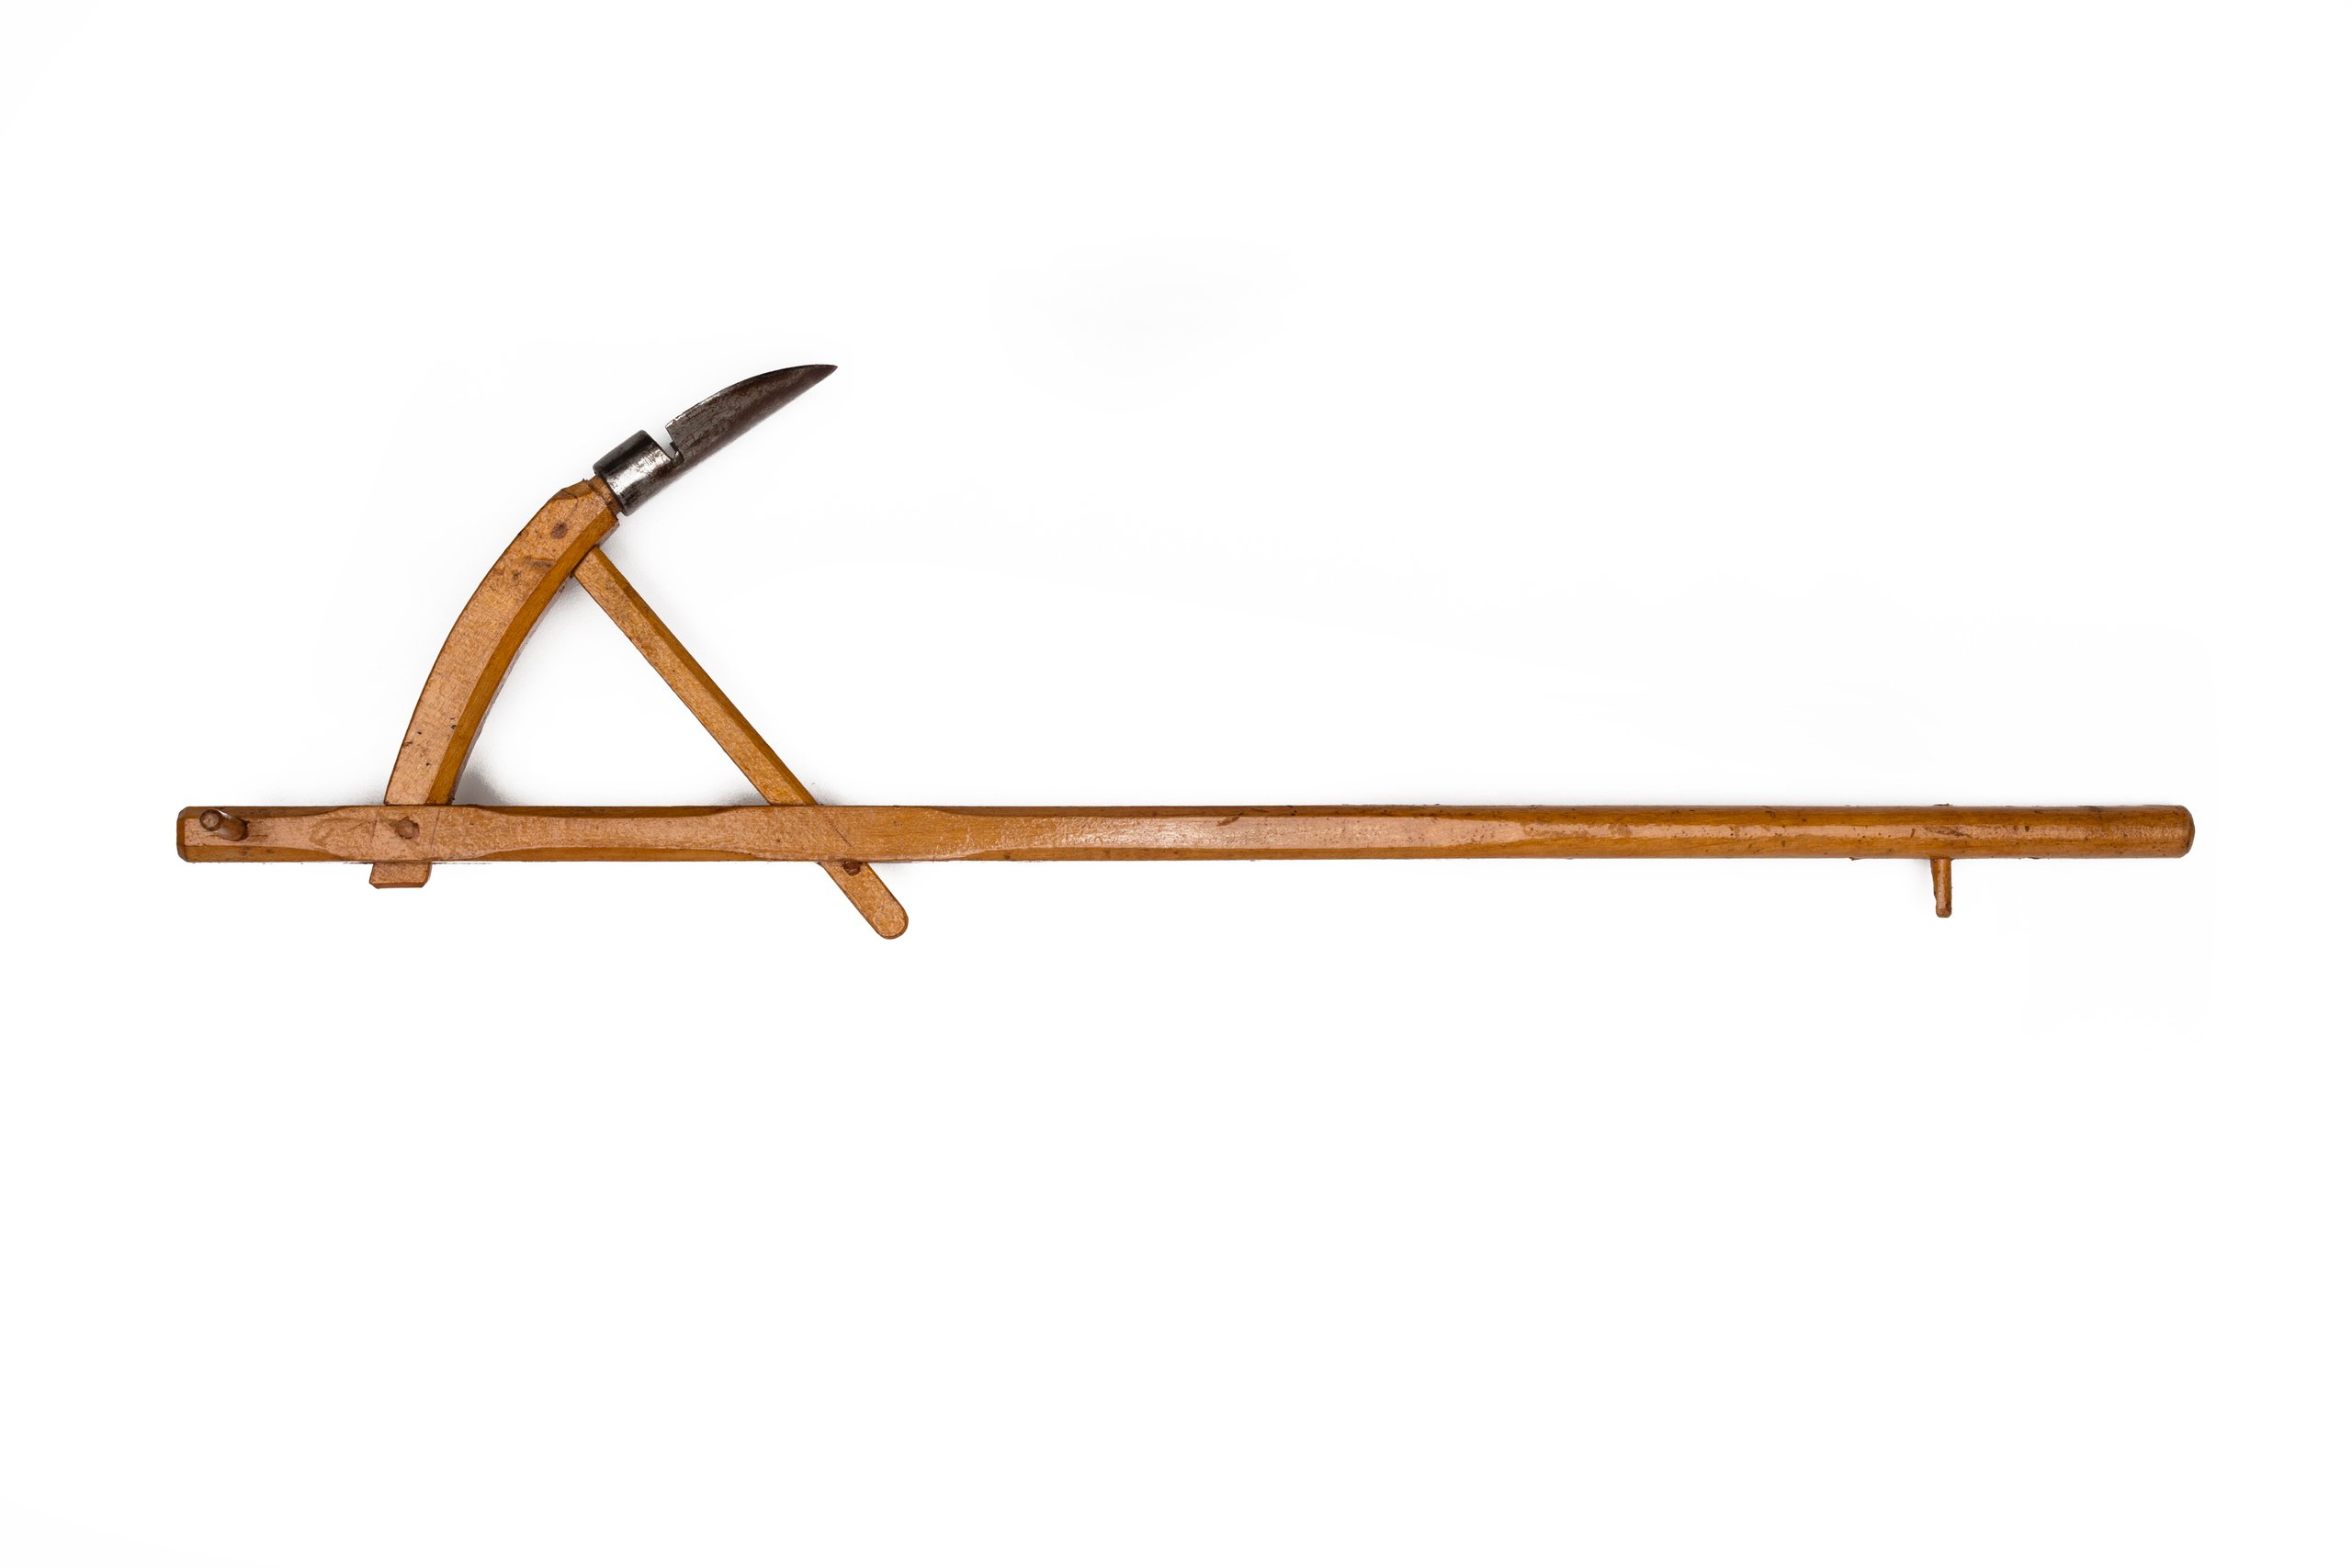 Model plough from Campagna, Rome